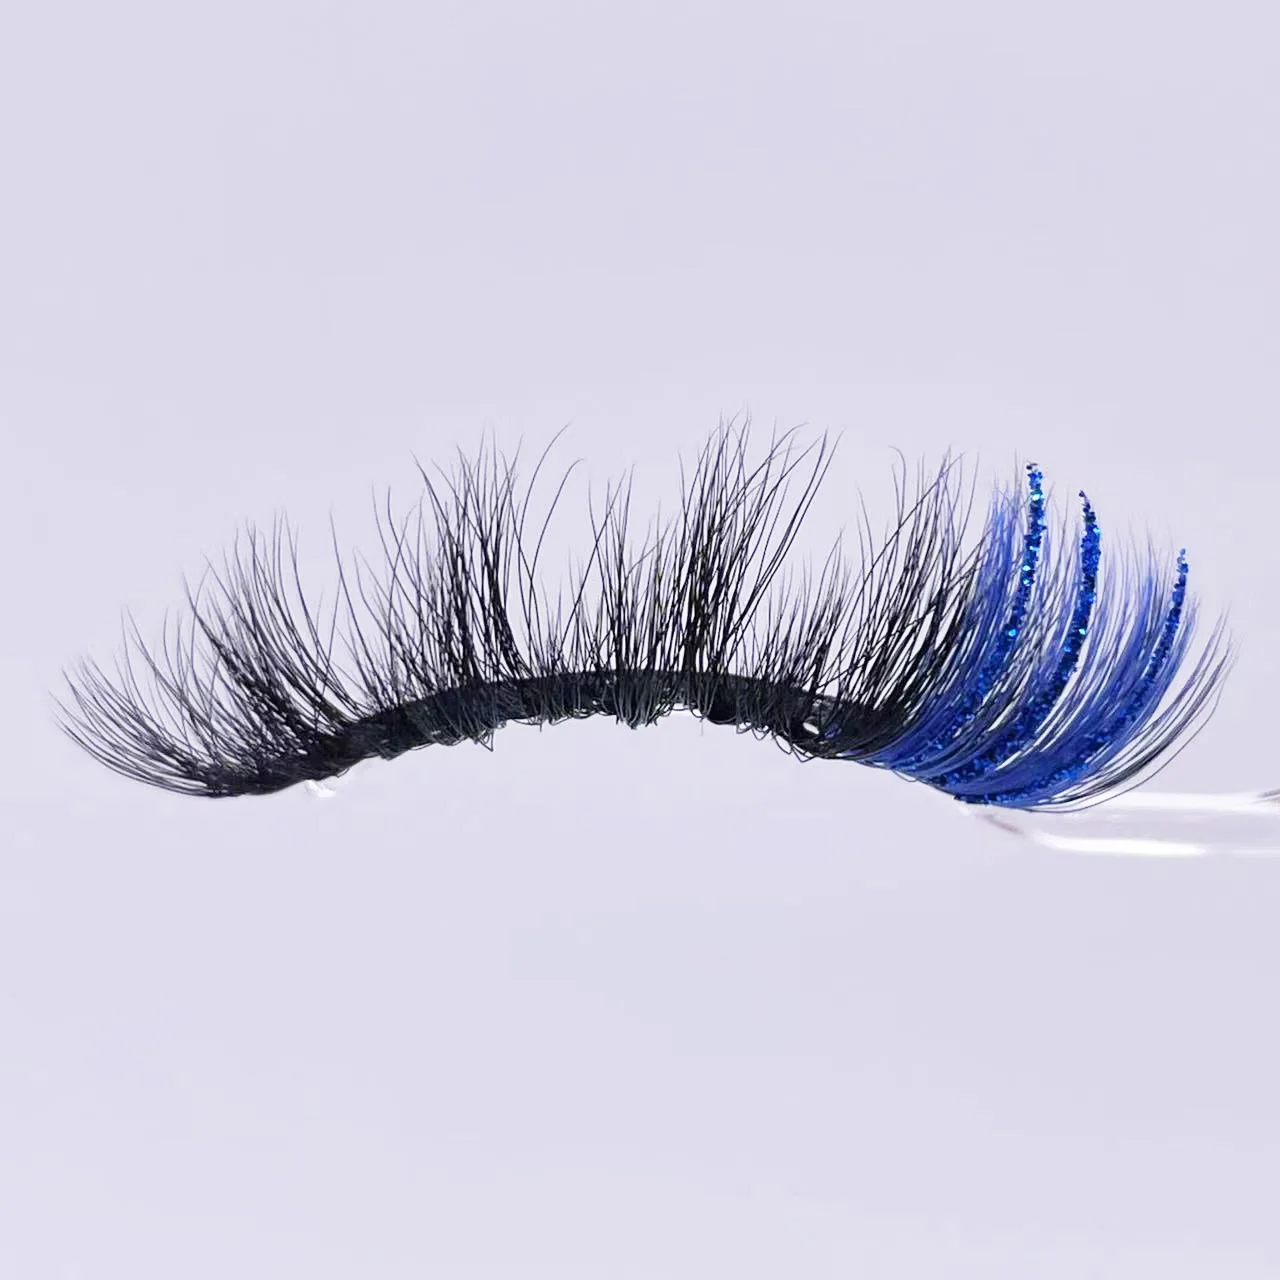 Hbzgtlad Colored Lashes Glitter Mink 15mm -20mm Fluffy Color Streaks Cosplay Makeup Beauty Eyelashes -Outlet Maid Outfit Store S59be3cb424d14d9db76c1044289272cdo.jpg